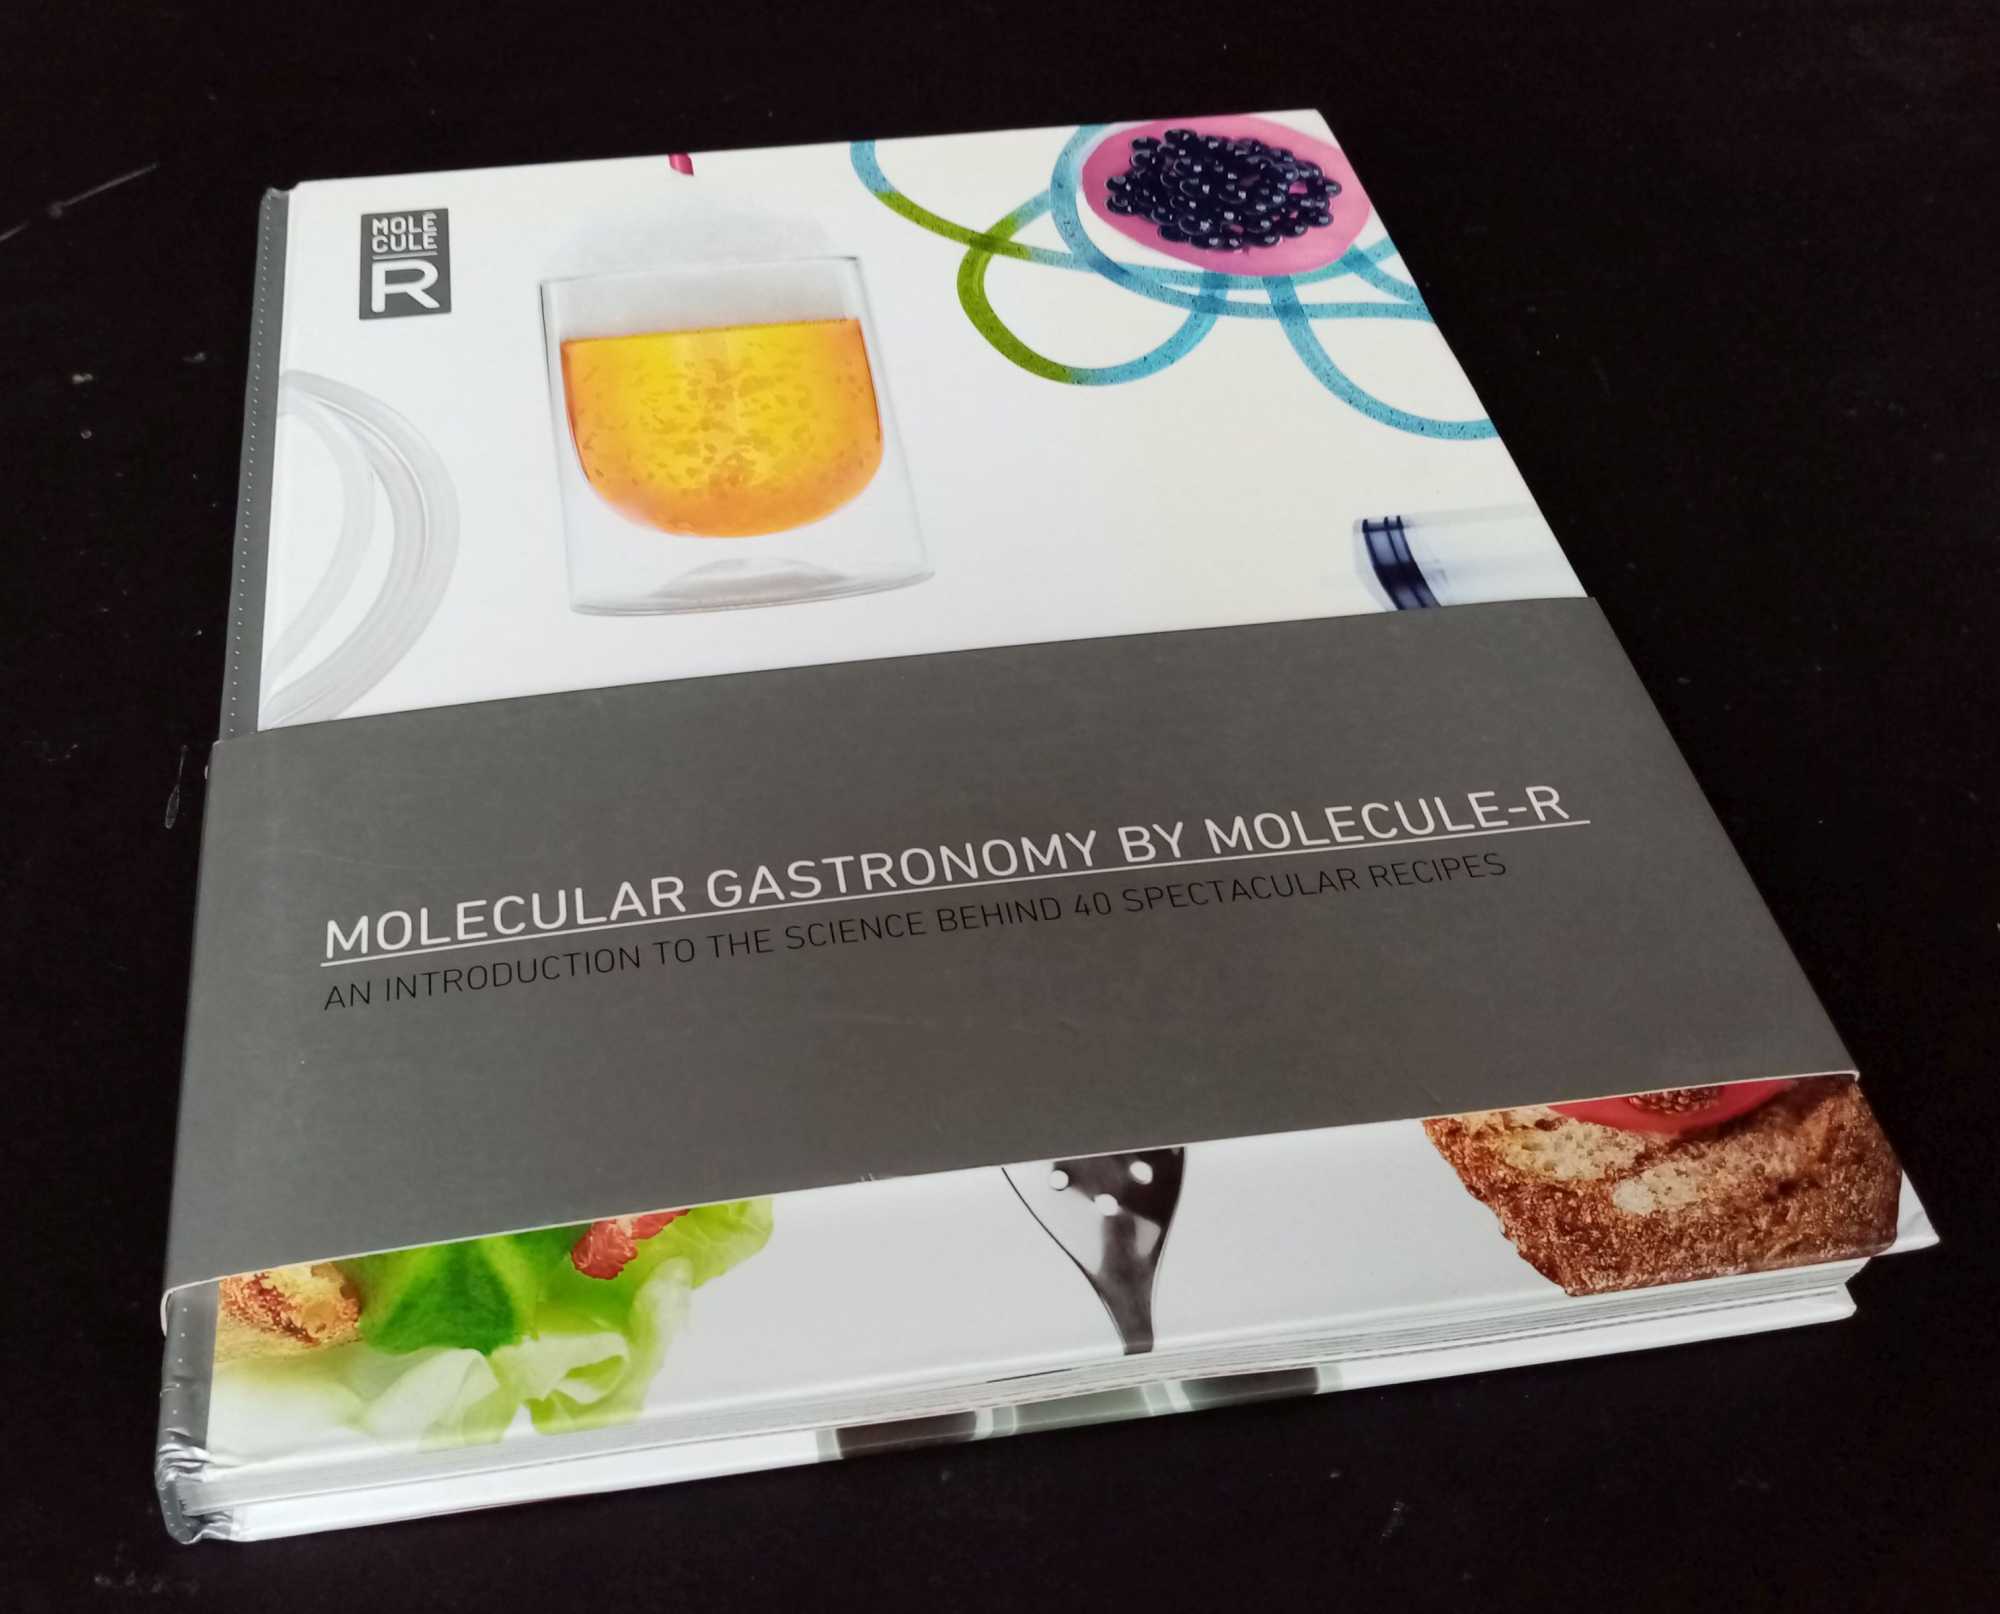 Molecule-R - Molecular Gastronomy By Molecule-R: An Introduction to the Science Behind 40 Spectacular Recipes